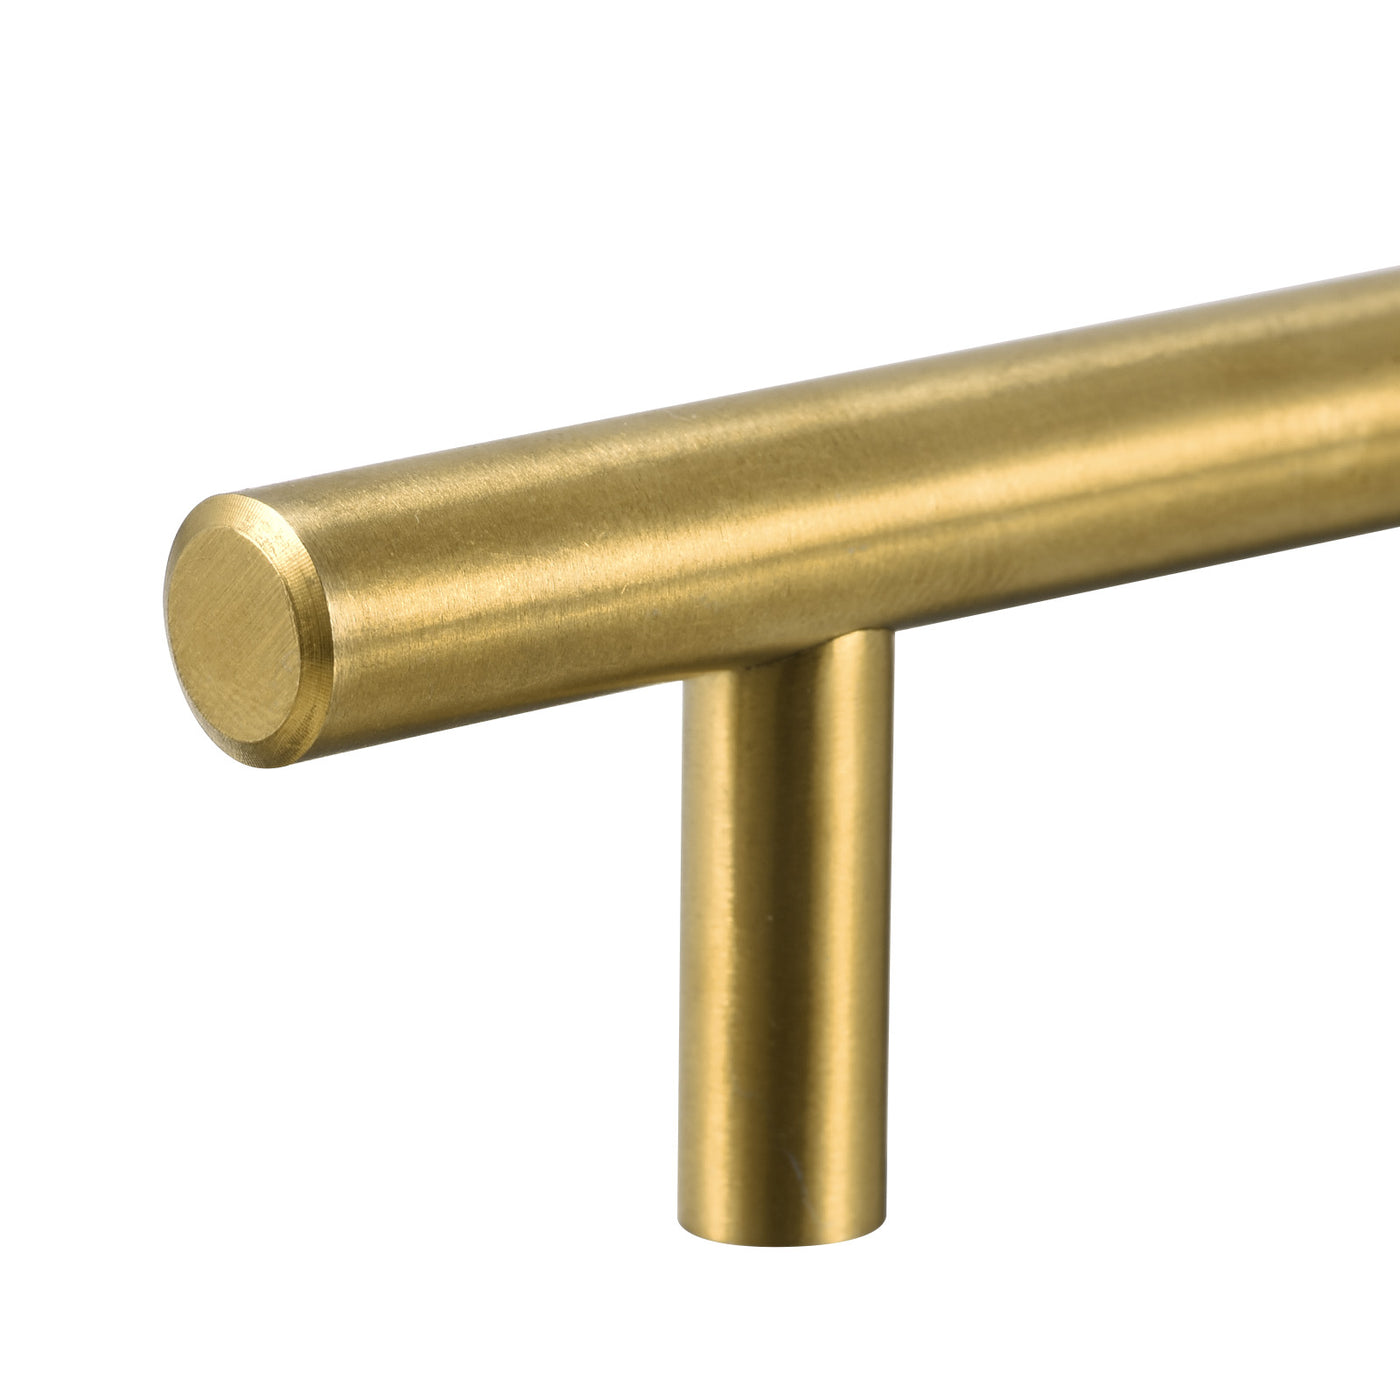 uxcell Uxcell T Bar Pull Handle, 14"(350mm) Length 10mm Dia Stainless Steel Cabinet Pulls 8.8"(224mm) Hole Center Distance Gold Tone 2pcs